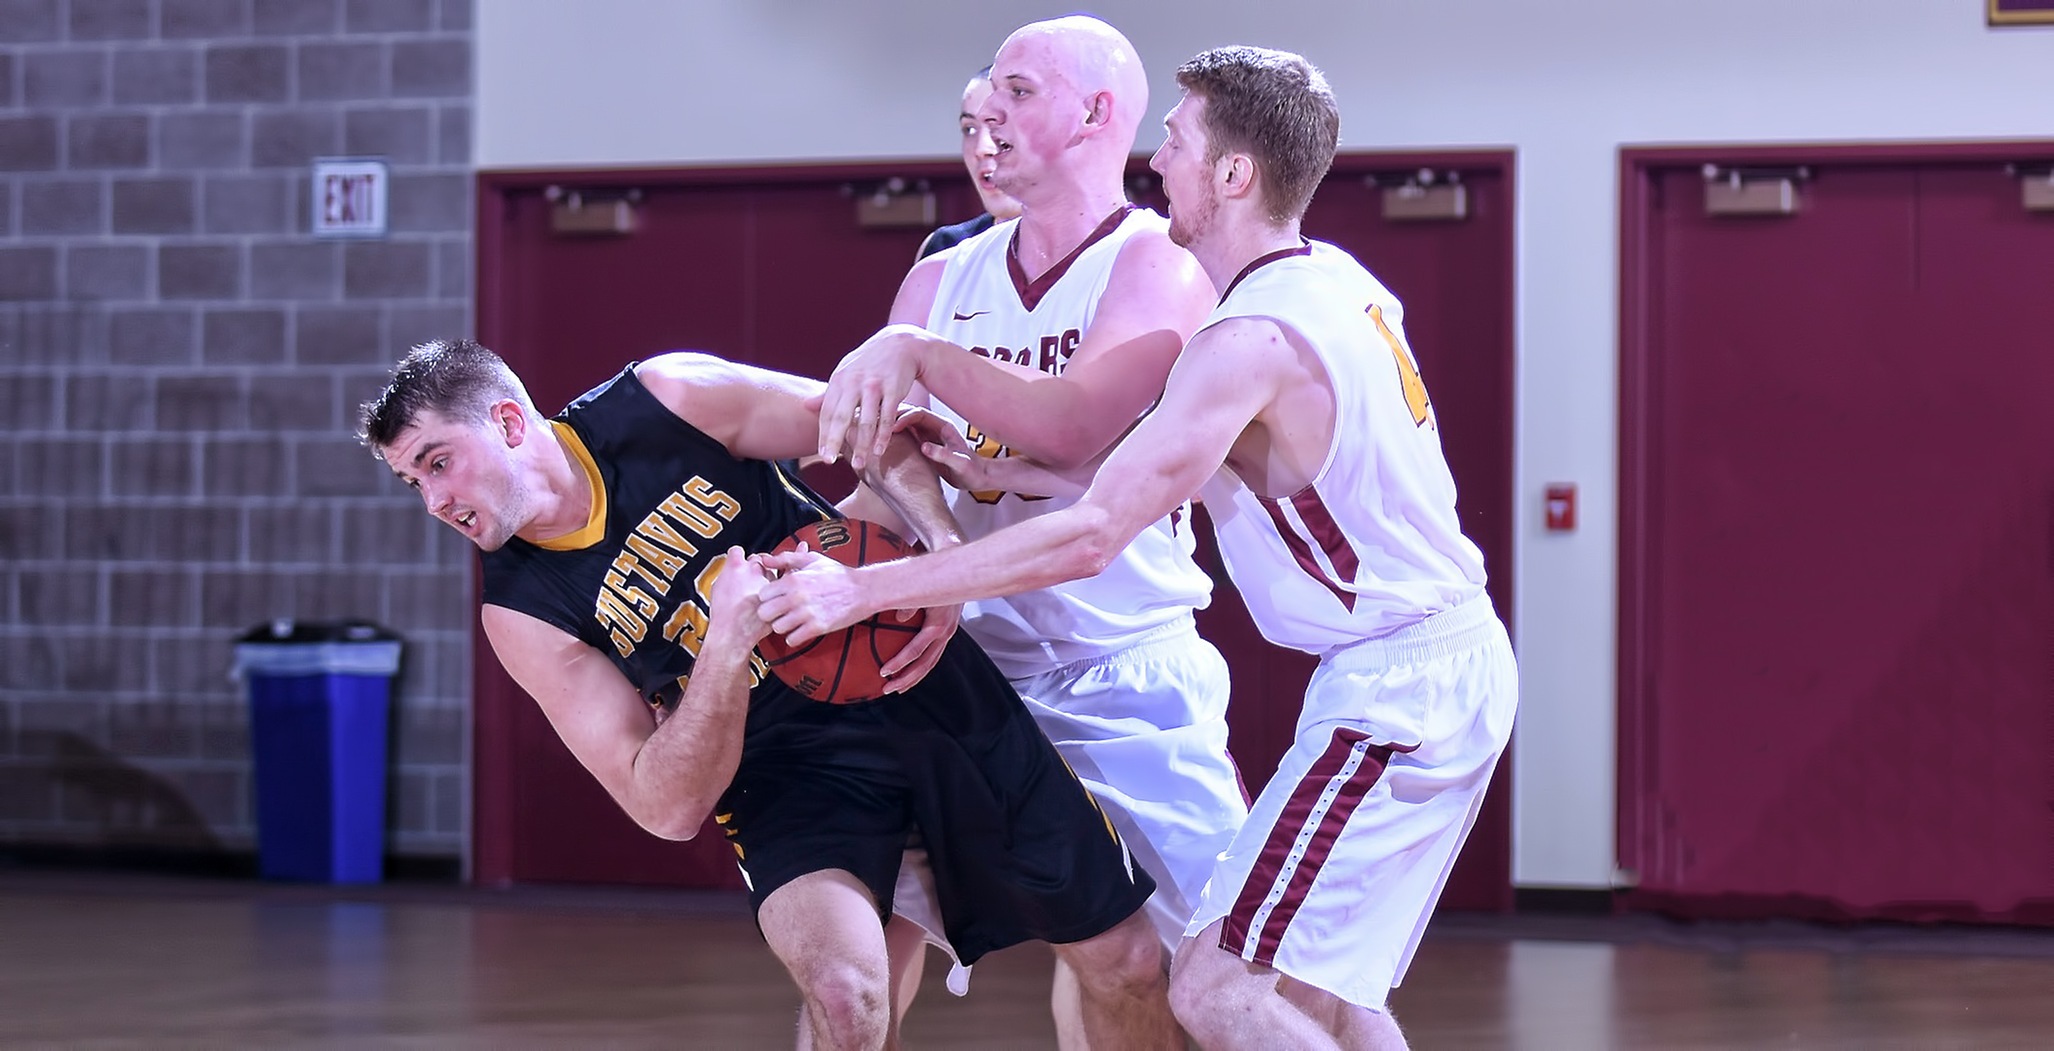 Seniors Dawson Peterson (L) and Collin Larson fight for a loose ball in the second half of the Cobbers' season finale with Gustavus. Peterson finished with a career-high 14 points.